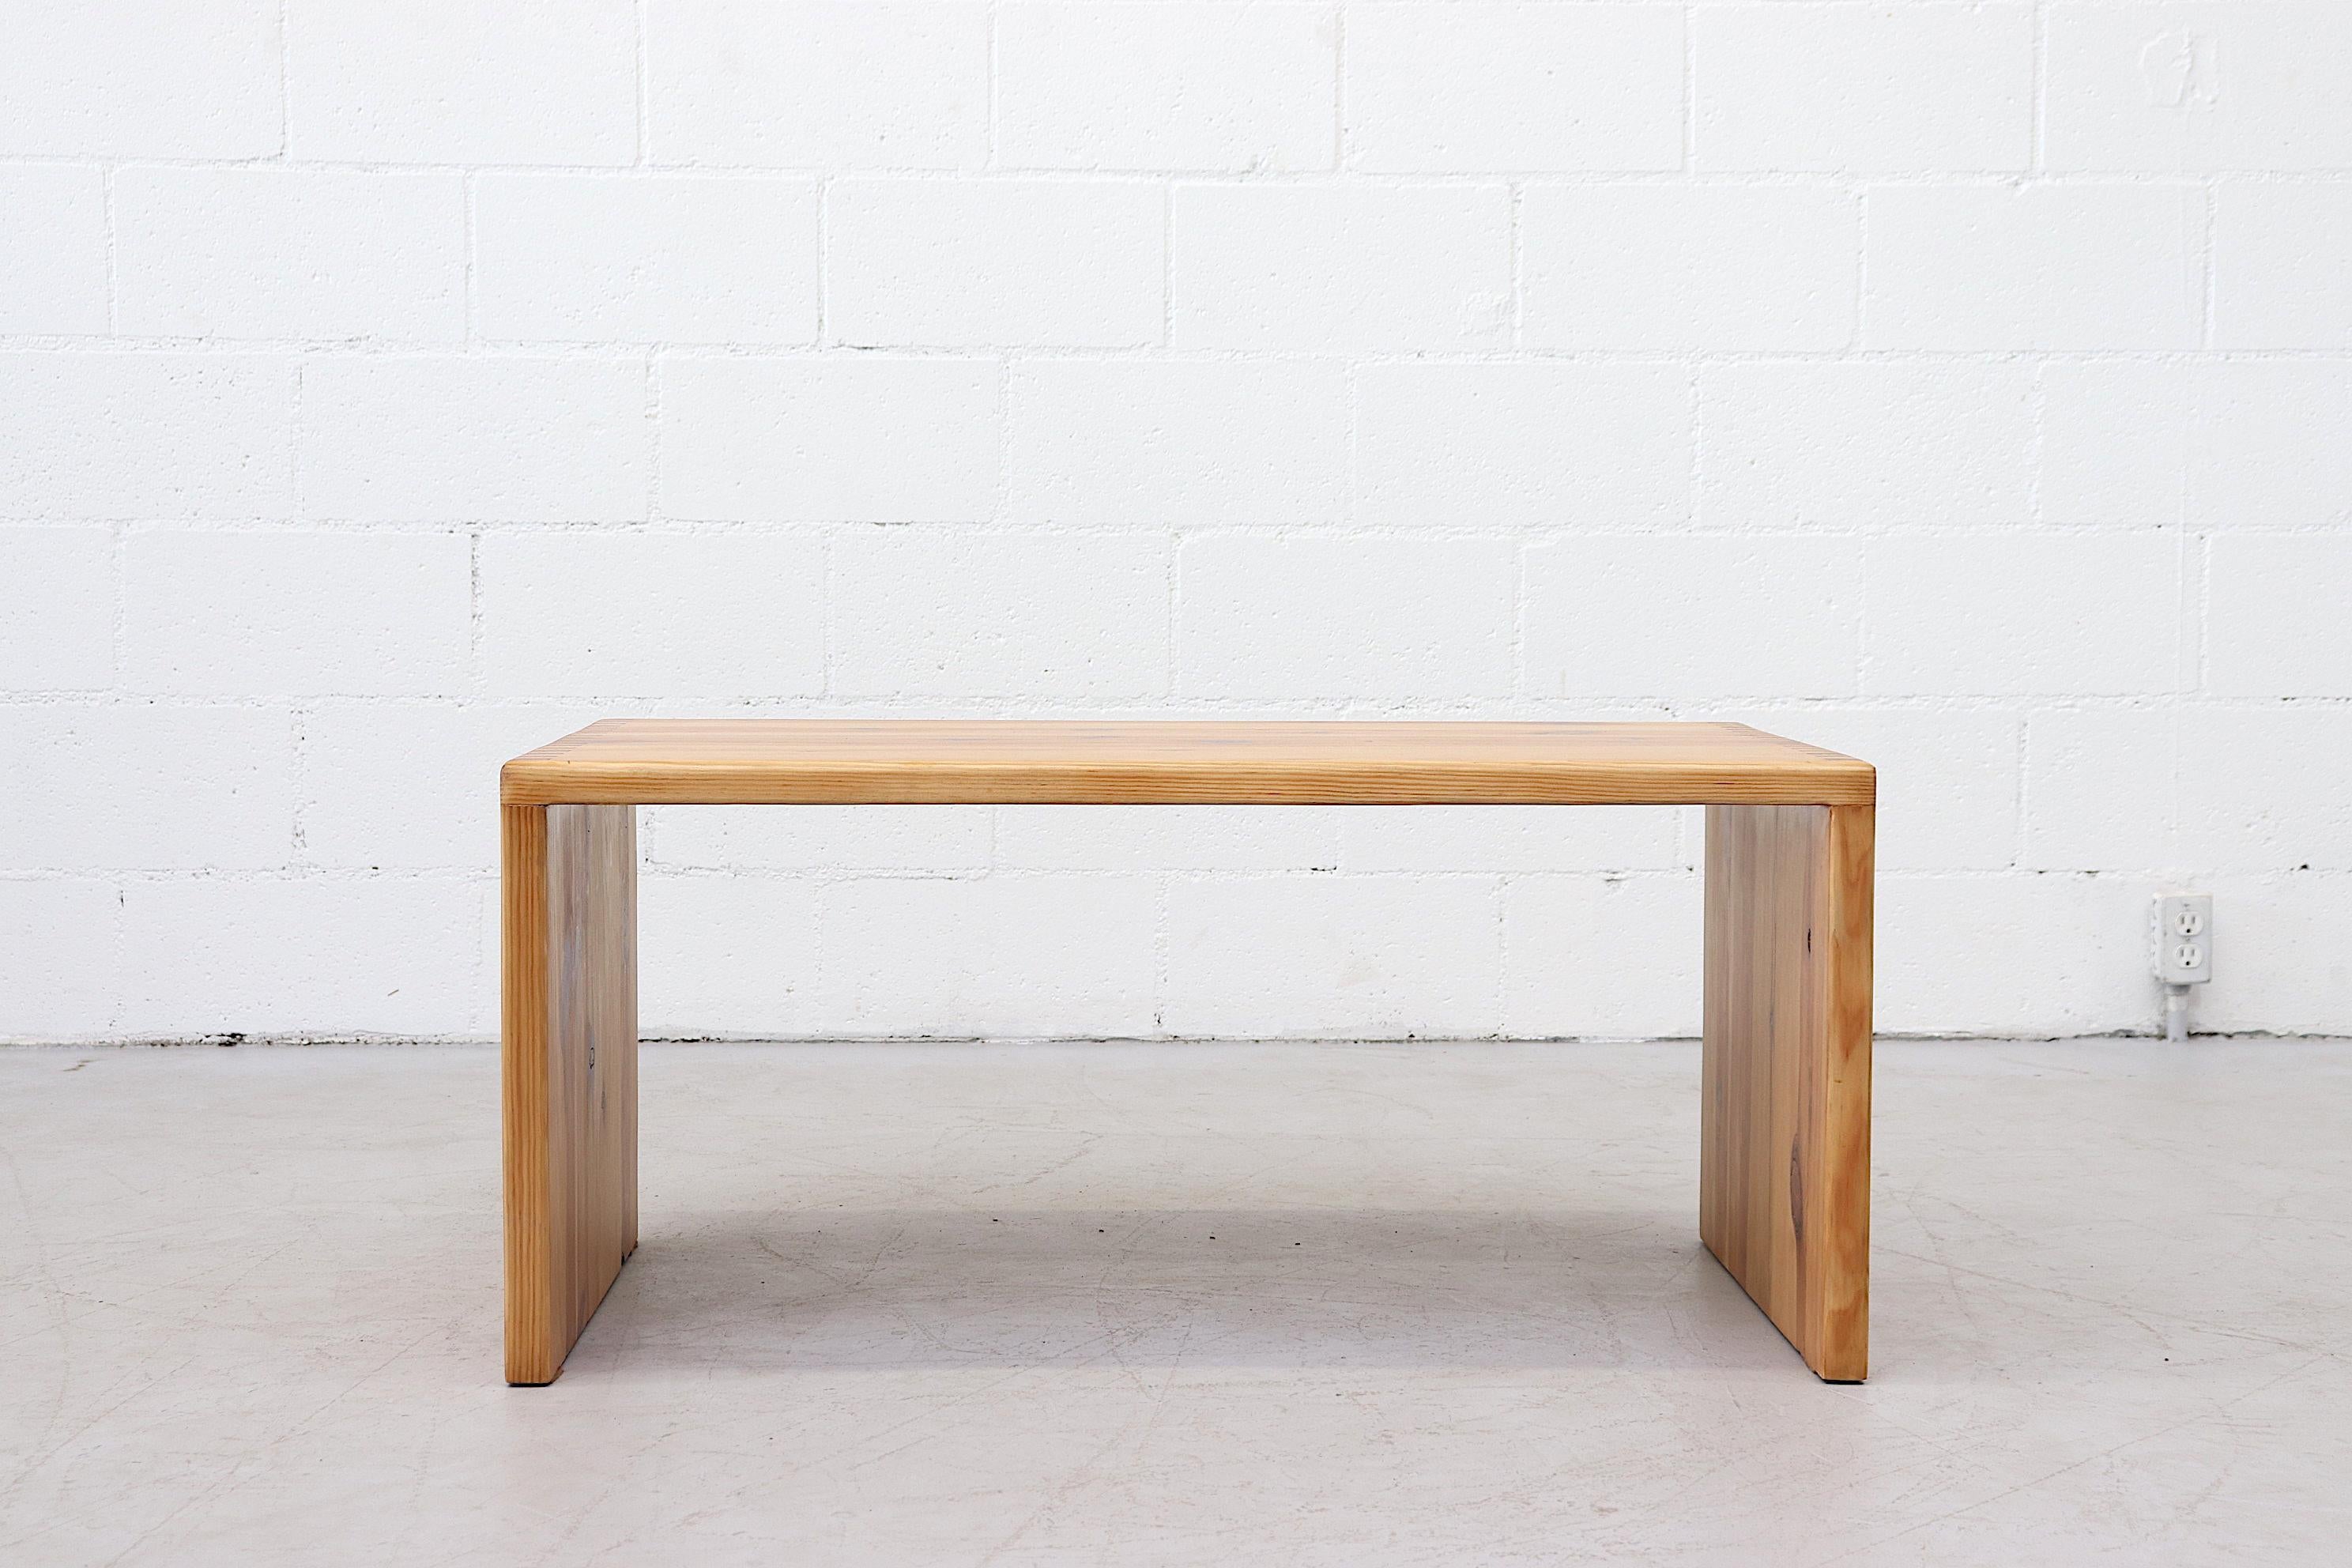 Lovely Ate Van Apeldoorn pine coffee table. Lightly refinished with attractive wood grain and handsome joinery. In original condition with moderate signs of wear consistent with age and use.